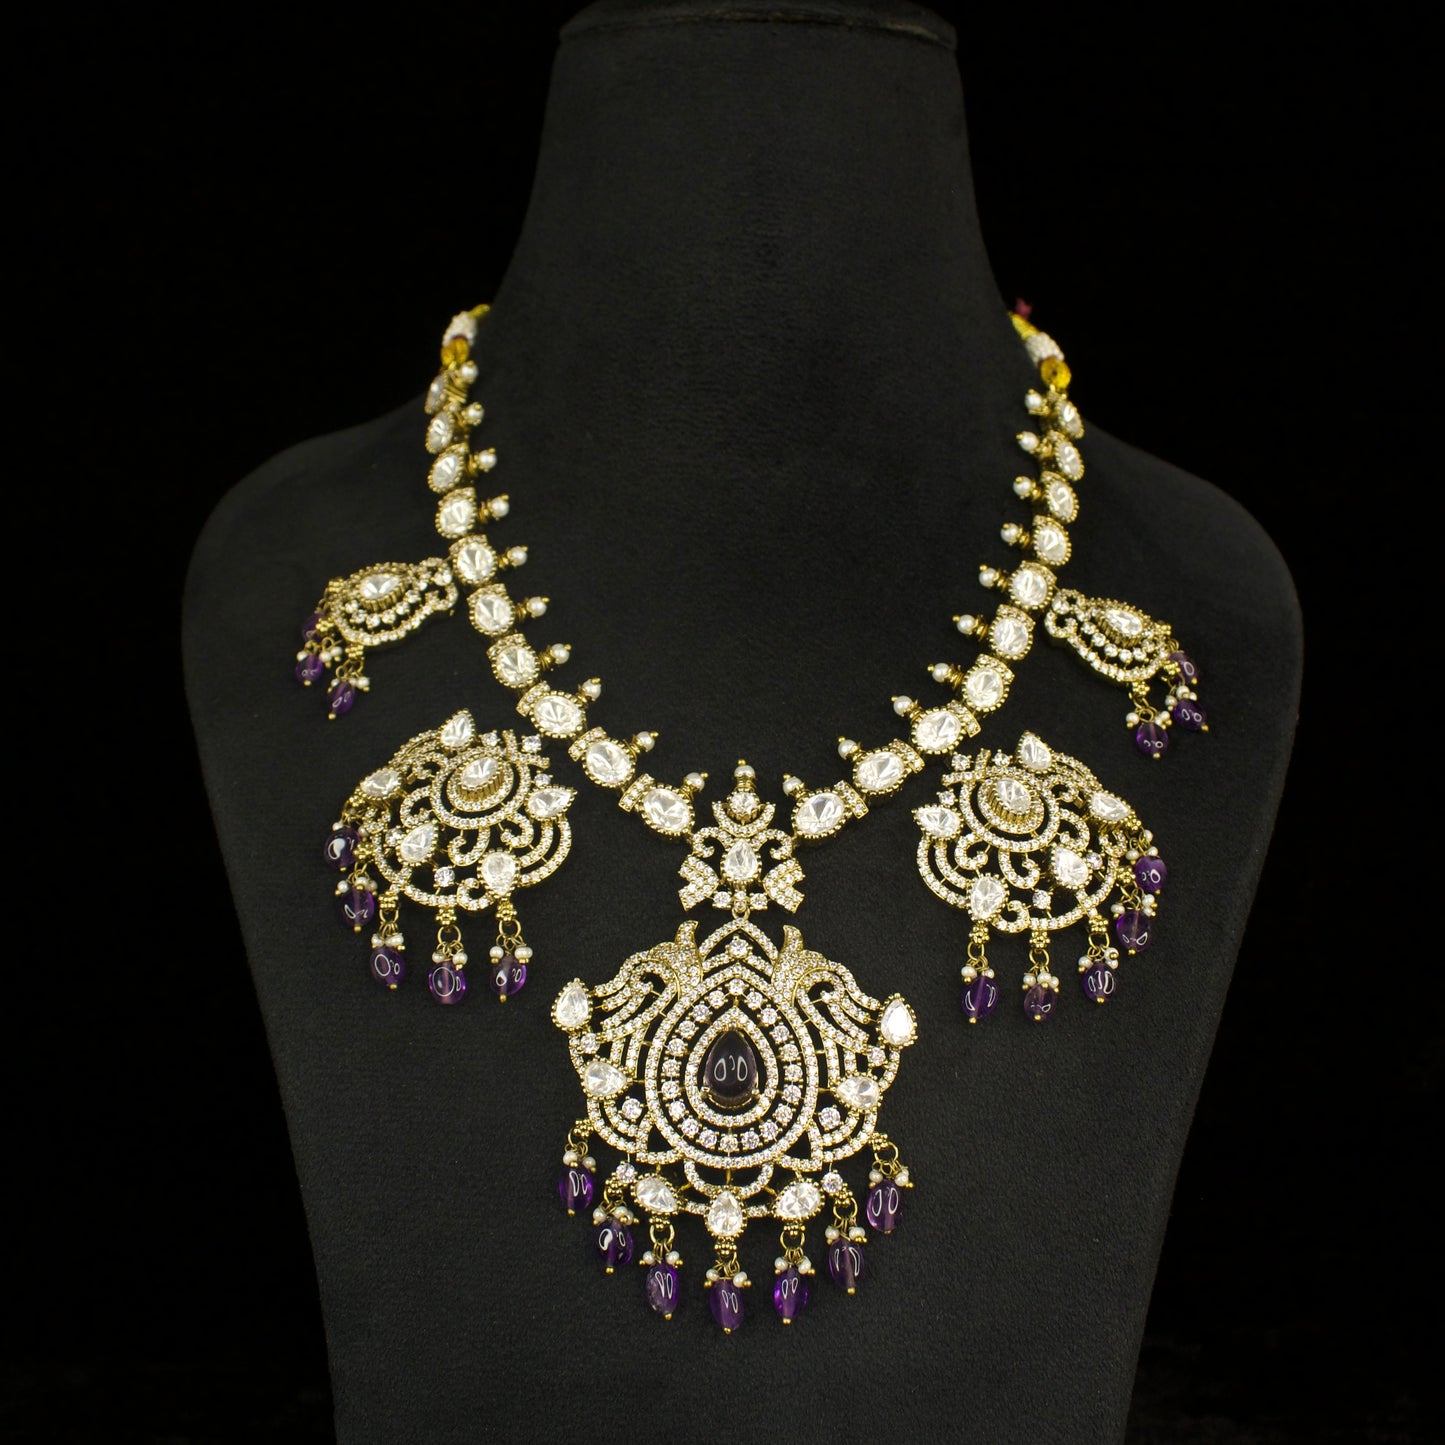 Gorgeous Peacock Victorian Necklace Set with onyx beads